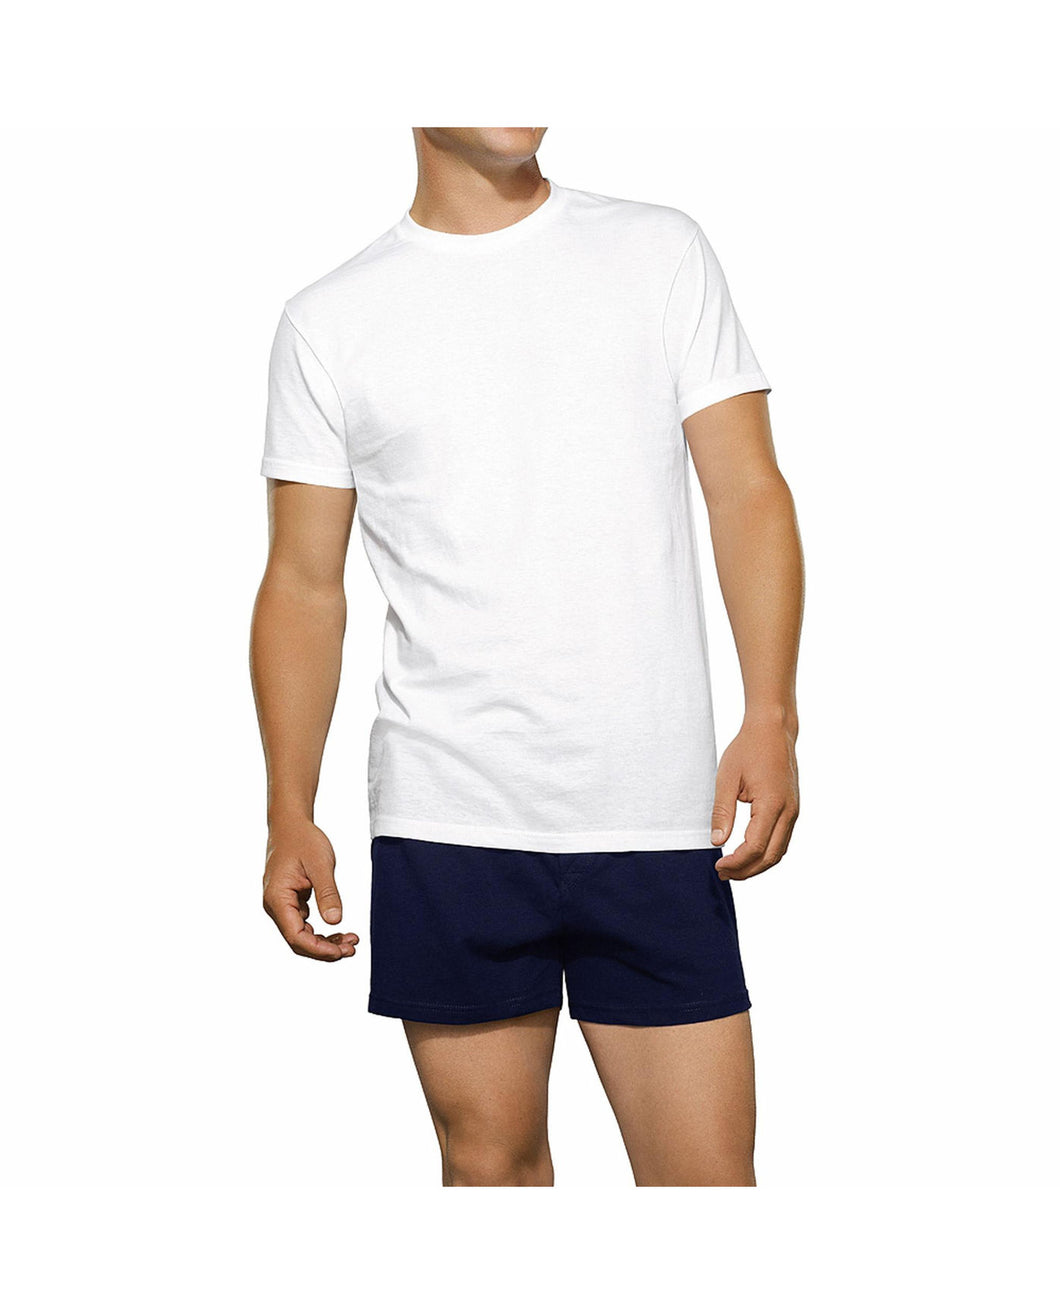 Fruit of the Loom 2828 Mens White Crewneck T-Shirt, 3-pack